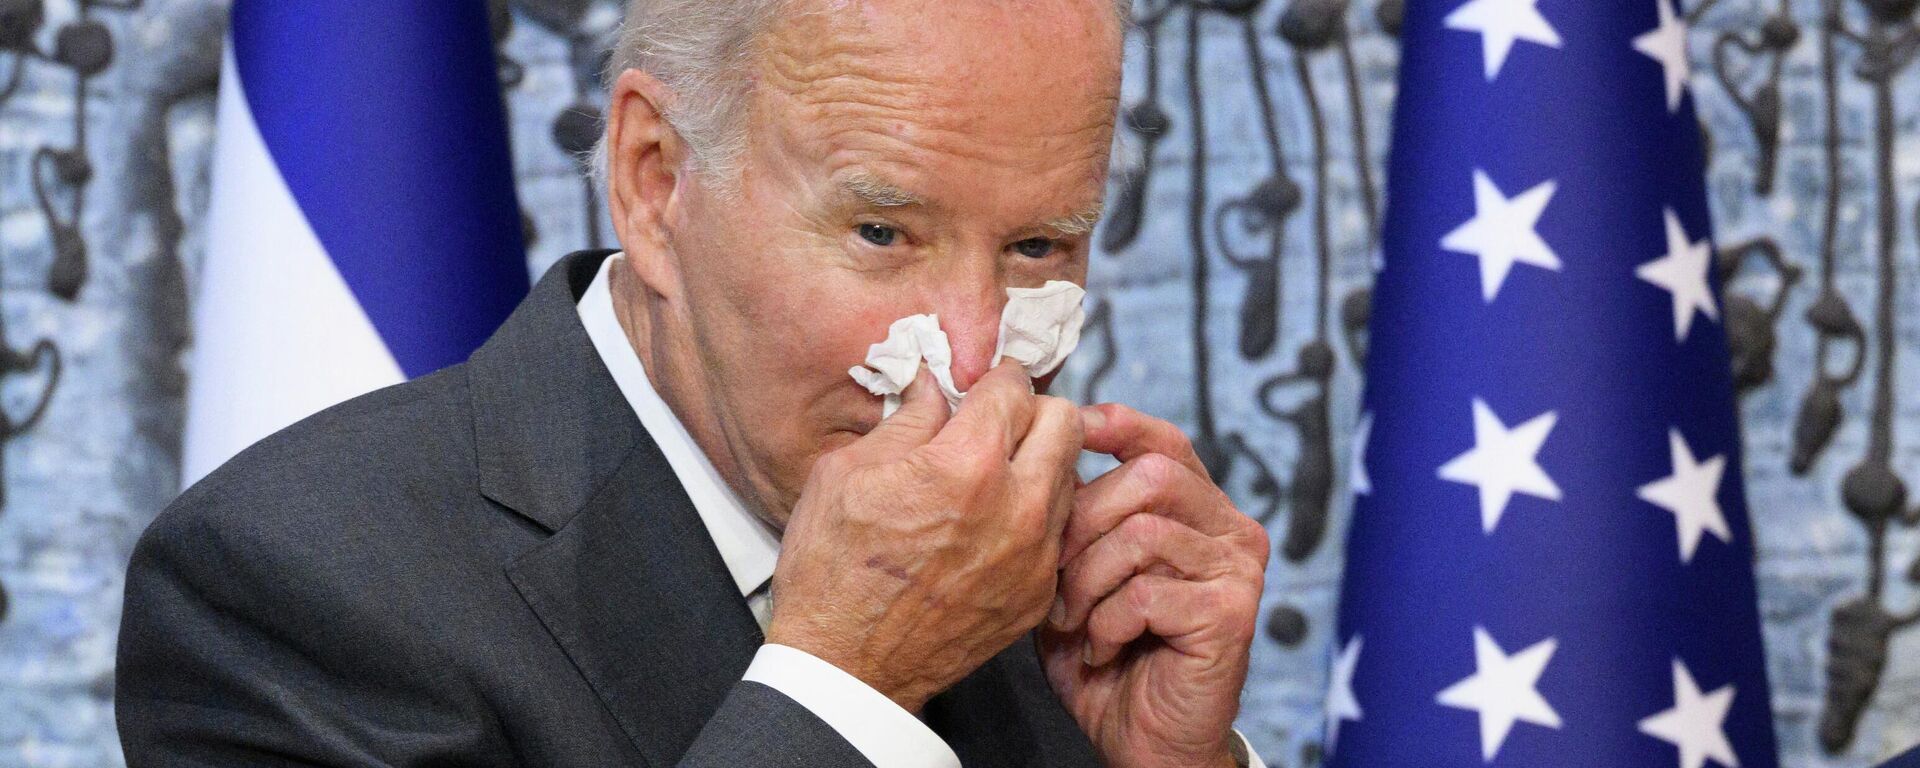 In this file photo taken on July 14, 2022, US President Joe Biden wipes his nose after signing the guest book while visiting Israel's President Isaac Herzog at Beit HaNassi, the presidential residence in Jerusalem - Sputnik International, 1920, 31.07.2022